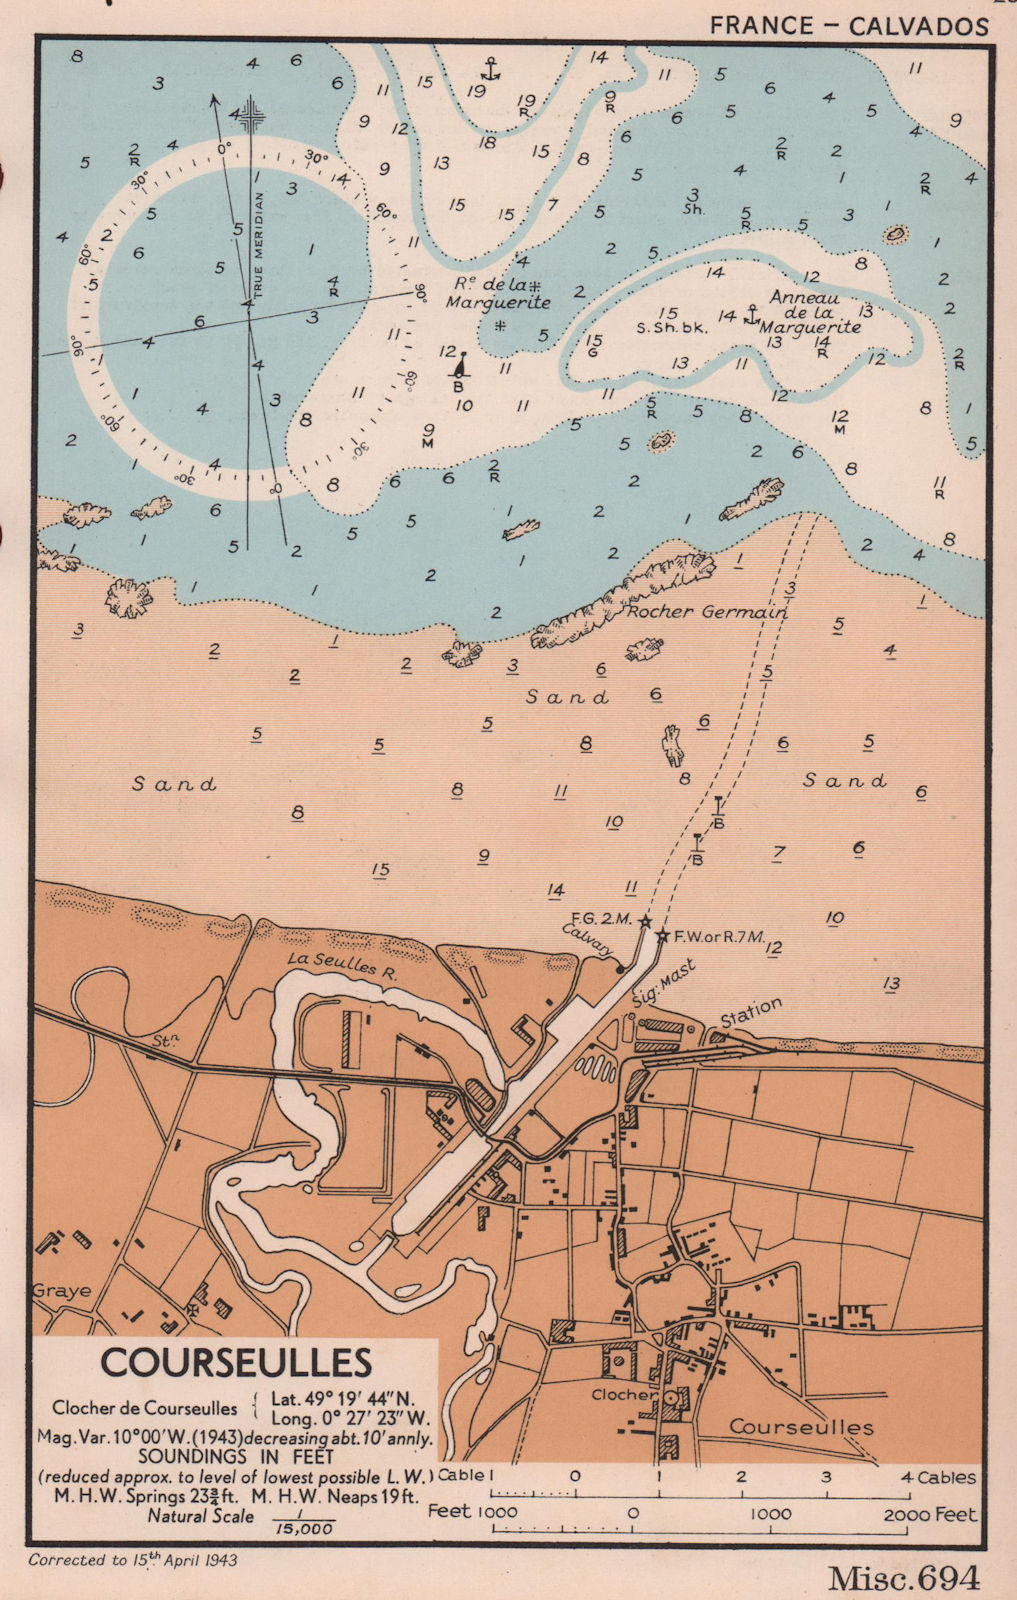 Associate Product Courseulles plan/sea coast chart. D-Day planning map. Juno beach. ADMIRALTY 1943